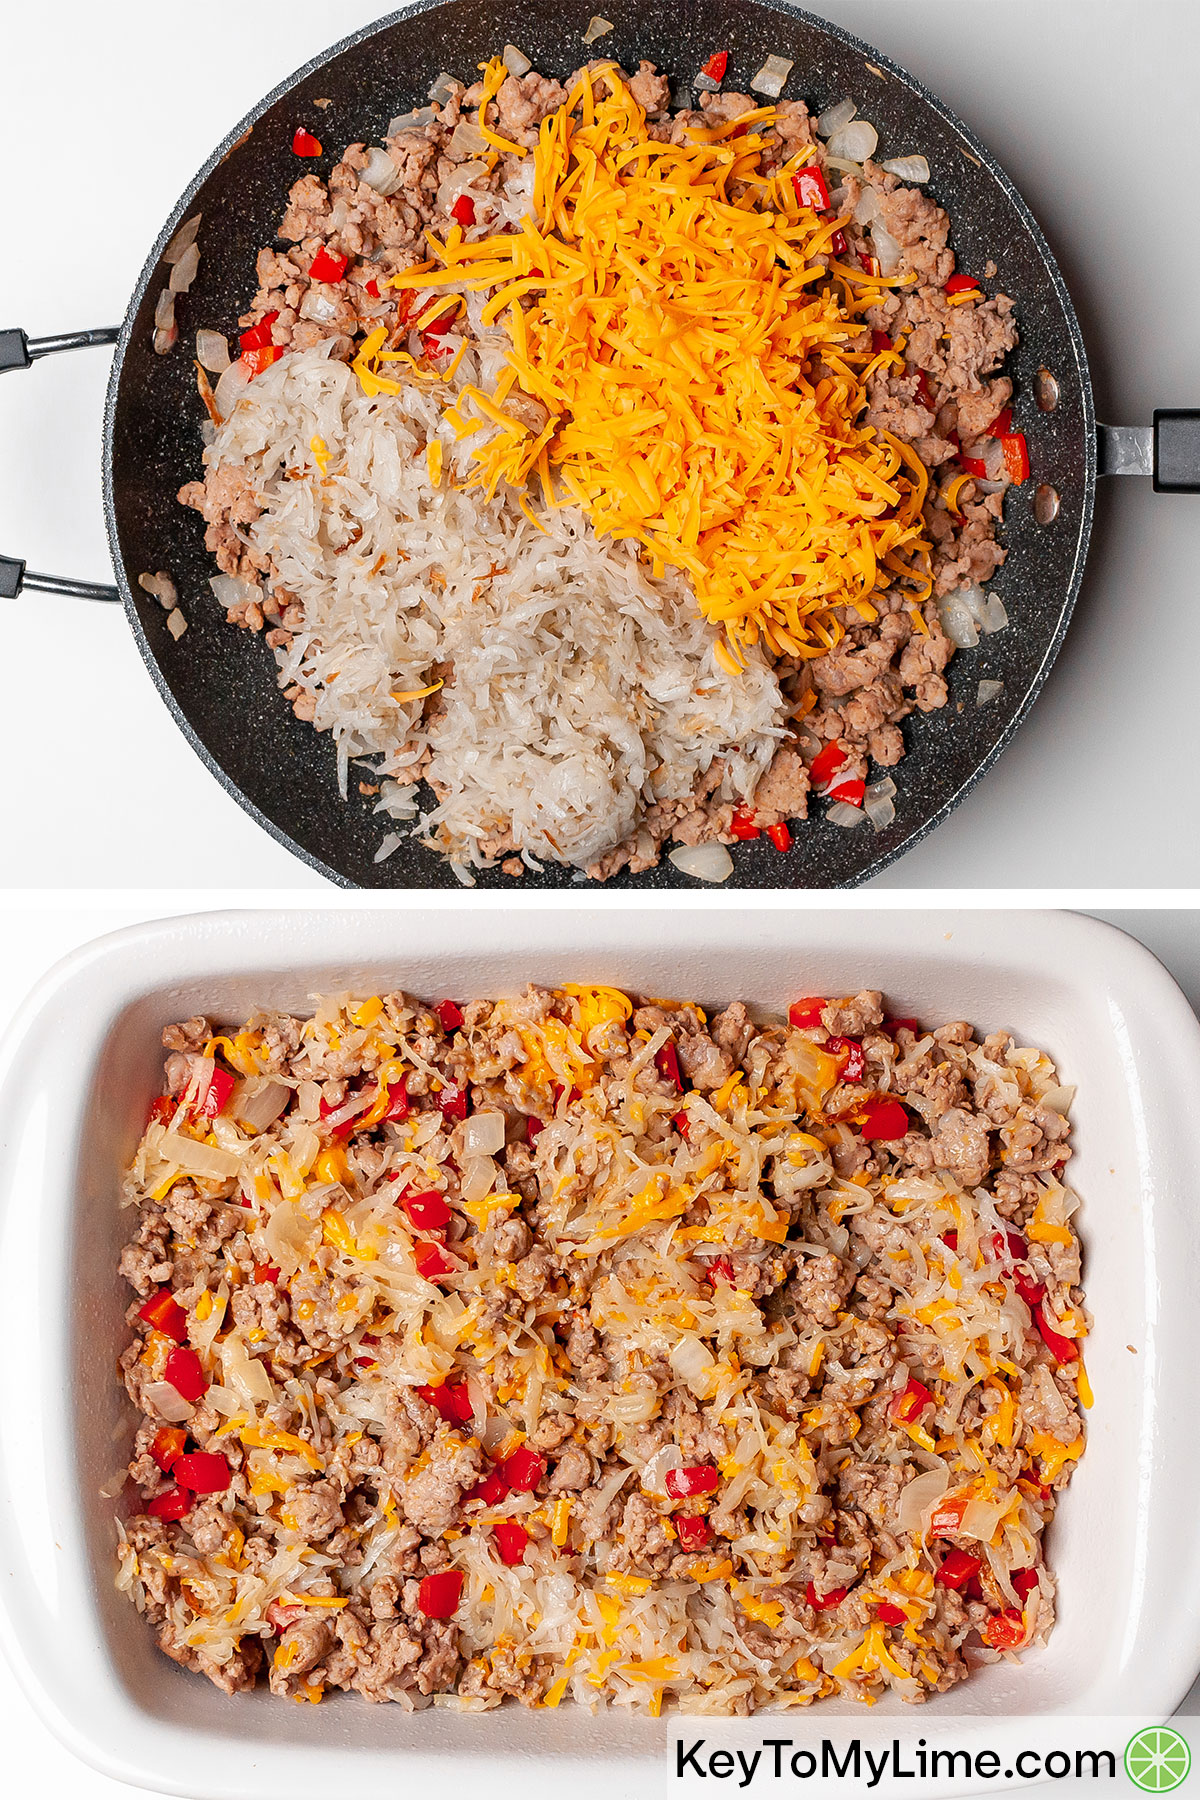 Mixing shredded cheese and hash browns into crumbled sausage, then spreading it out in a baking dish.